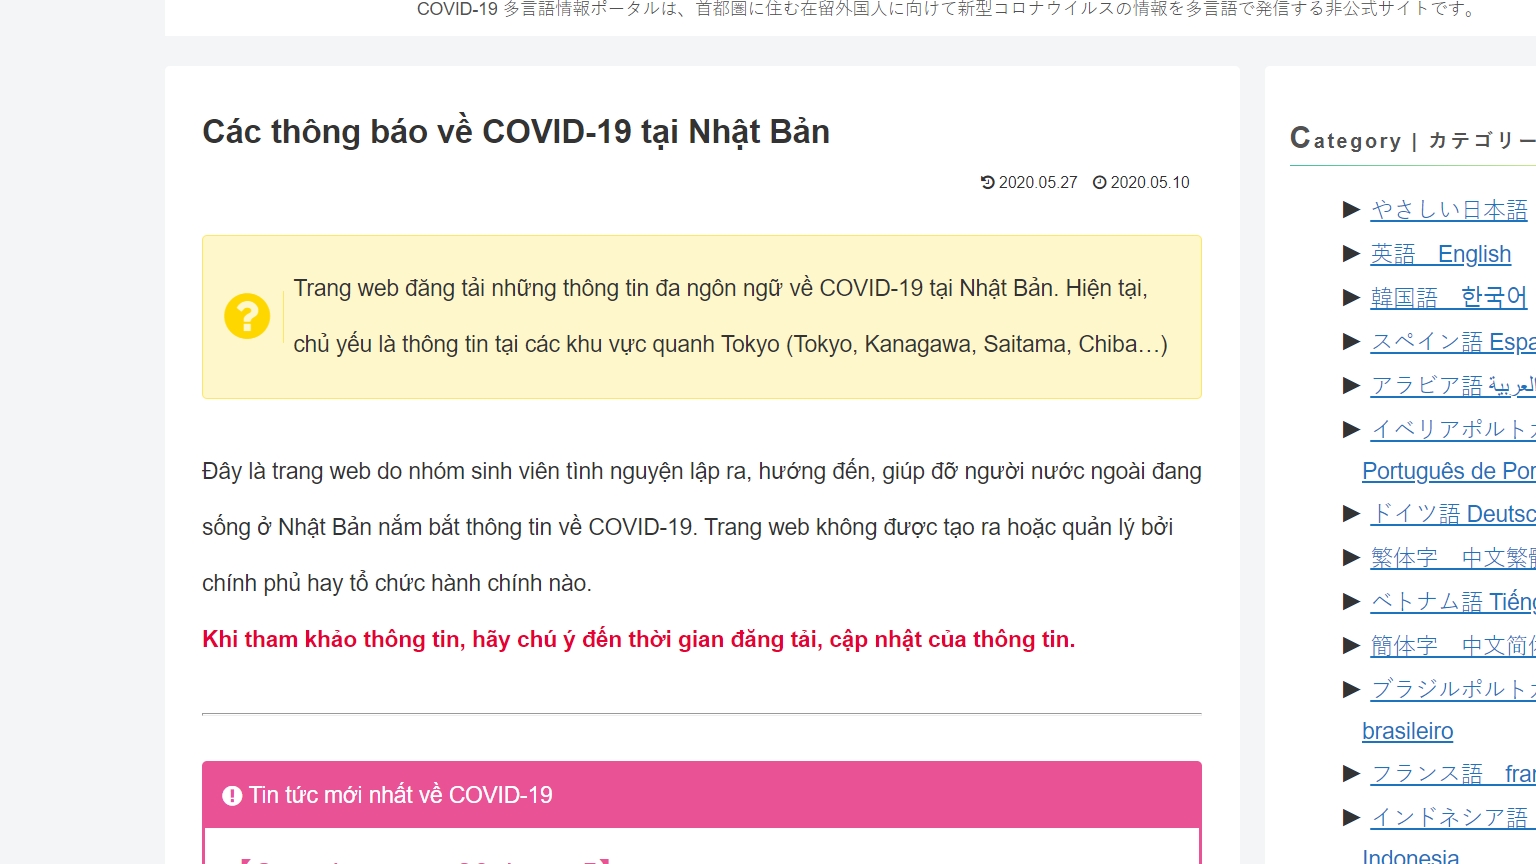 nhung website review ve forex co do tin cay cao